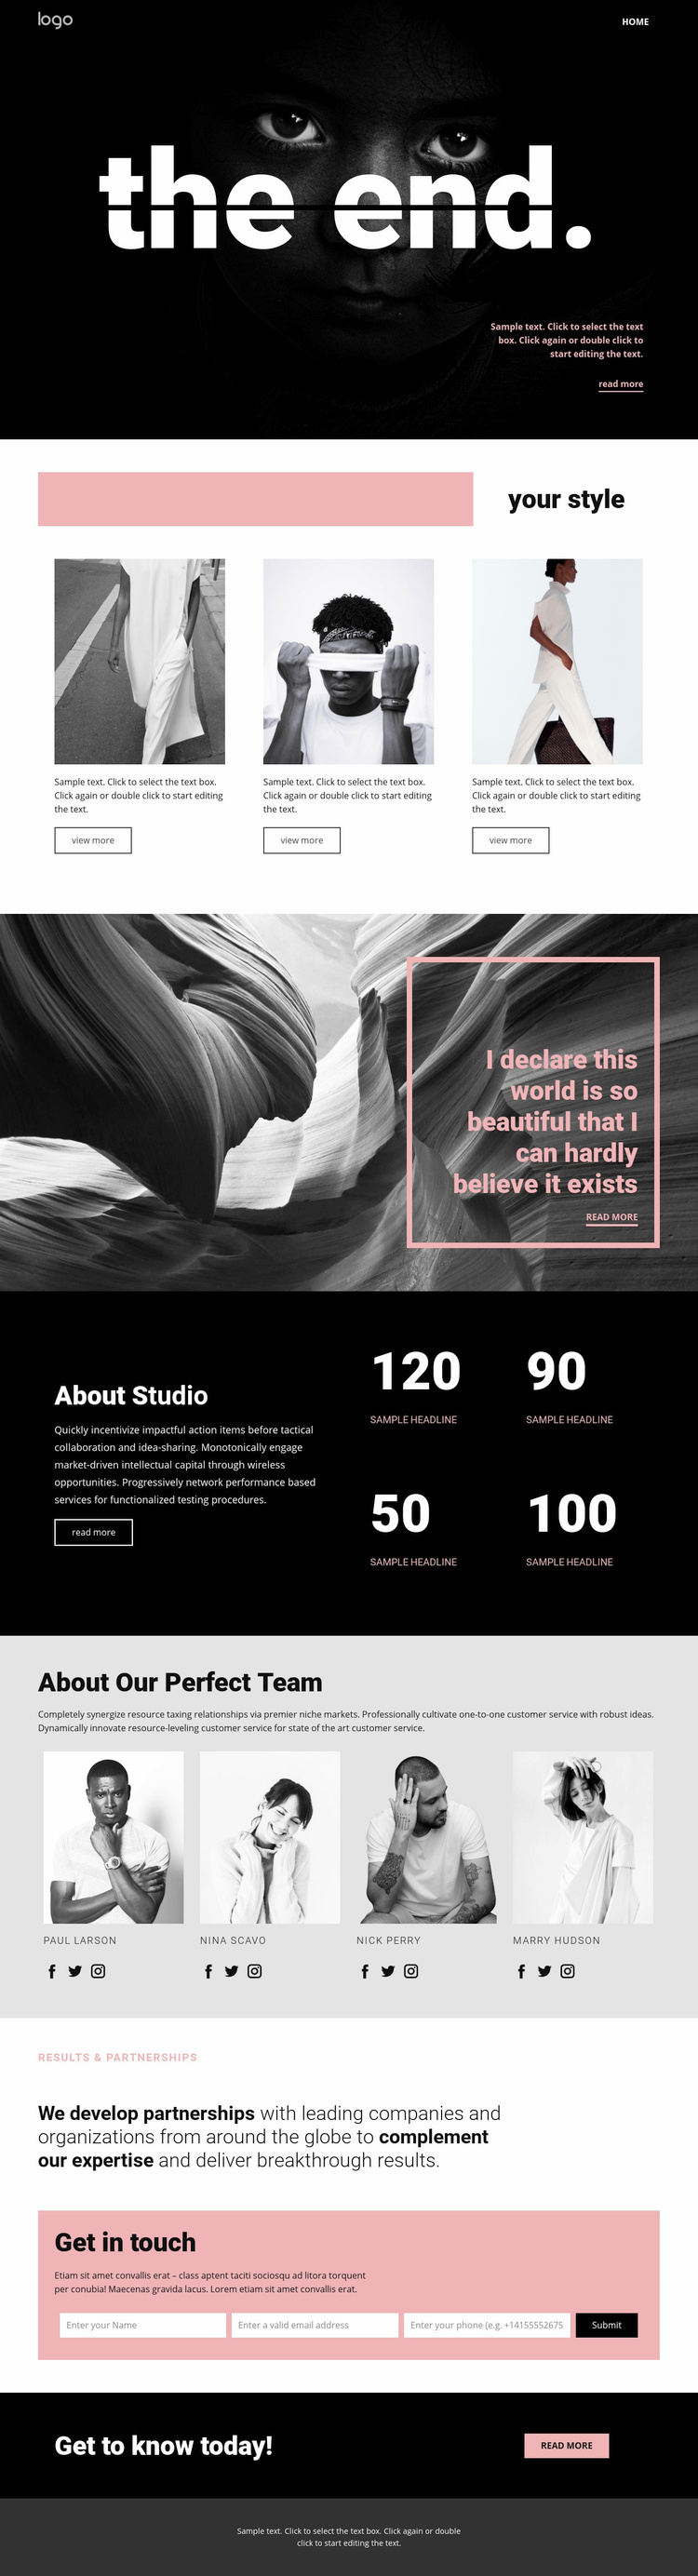 Perfecting styles of art Wix Template Alternative